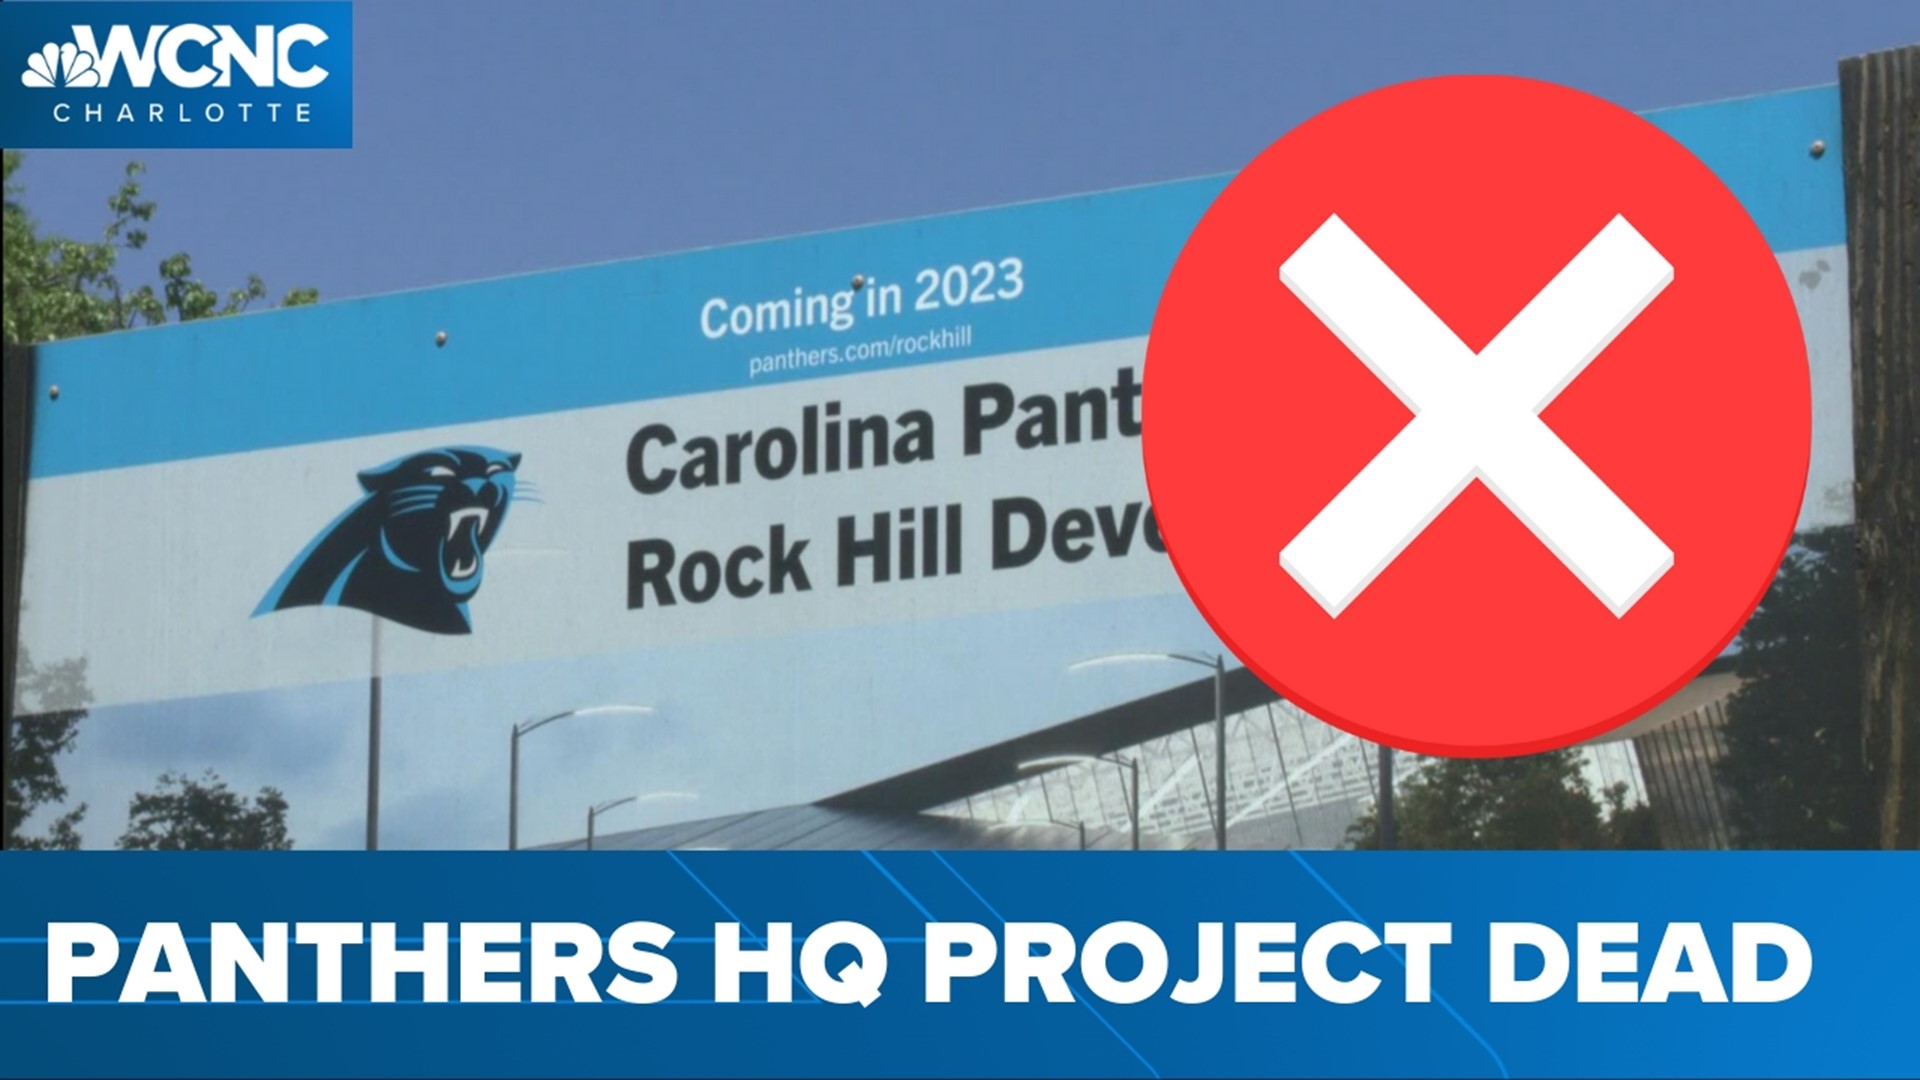 WCNC Charlotte learned that York County initiated a court filing on Wednesday morning to make sure Tepper doesn’t sell the Rock Hill site until debts are settled.